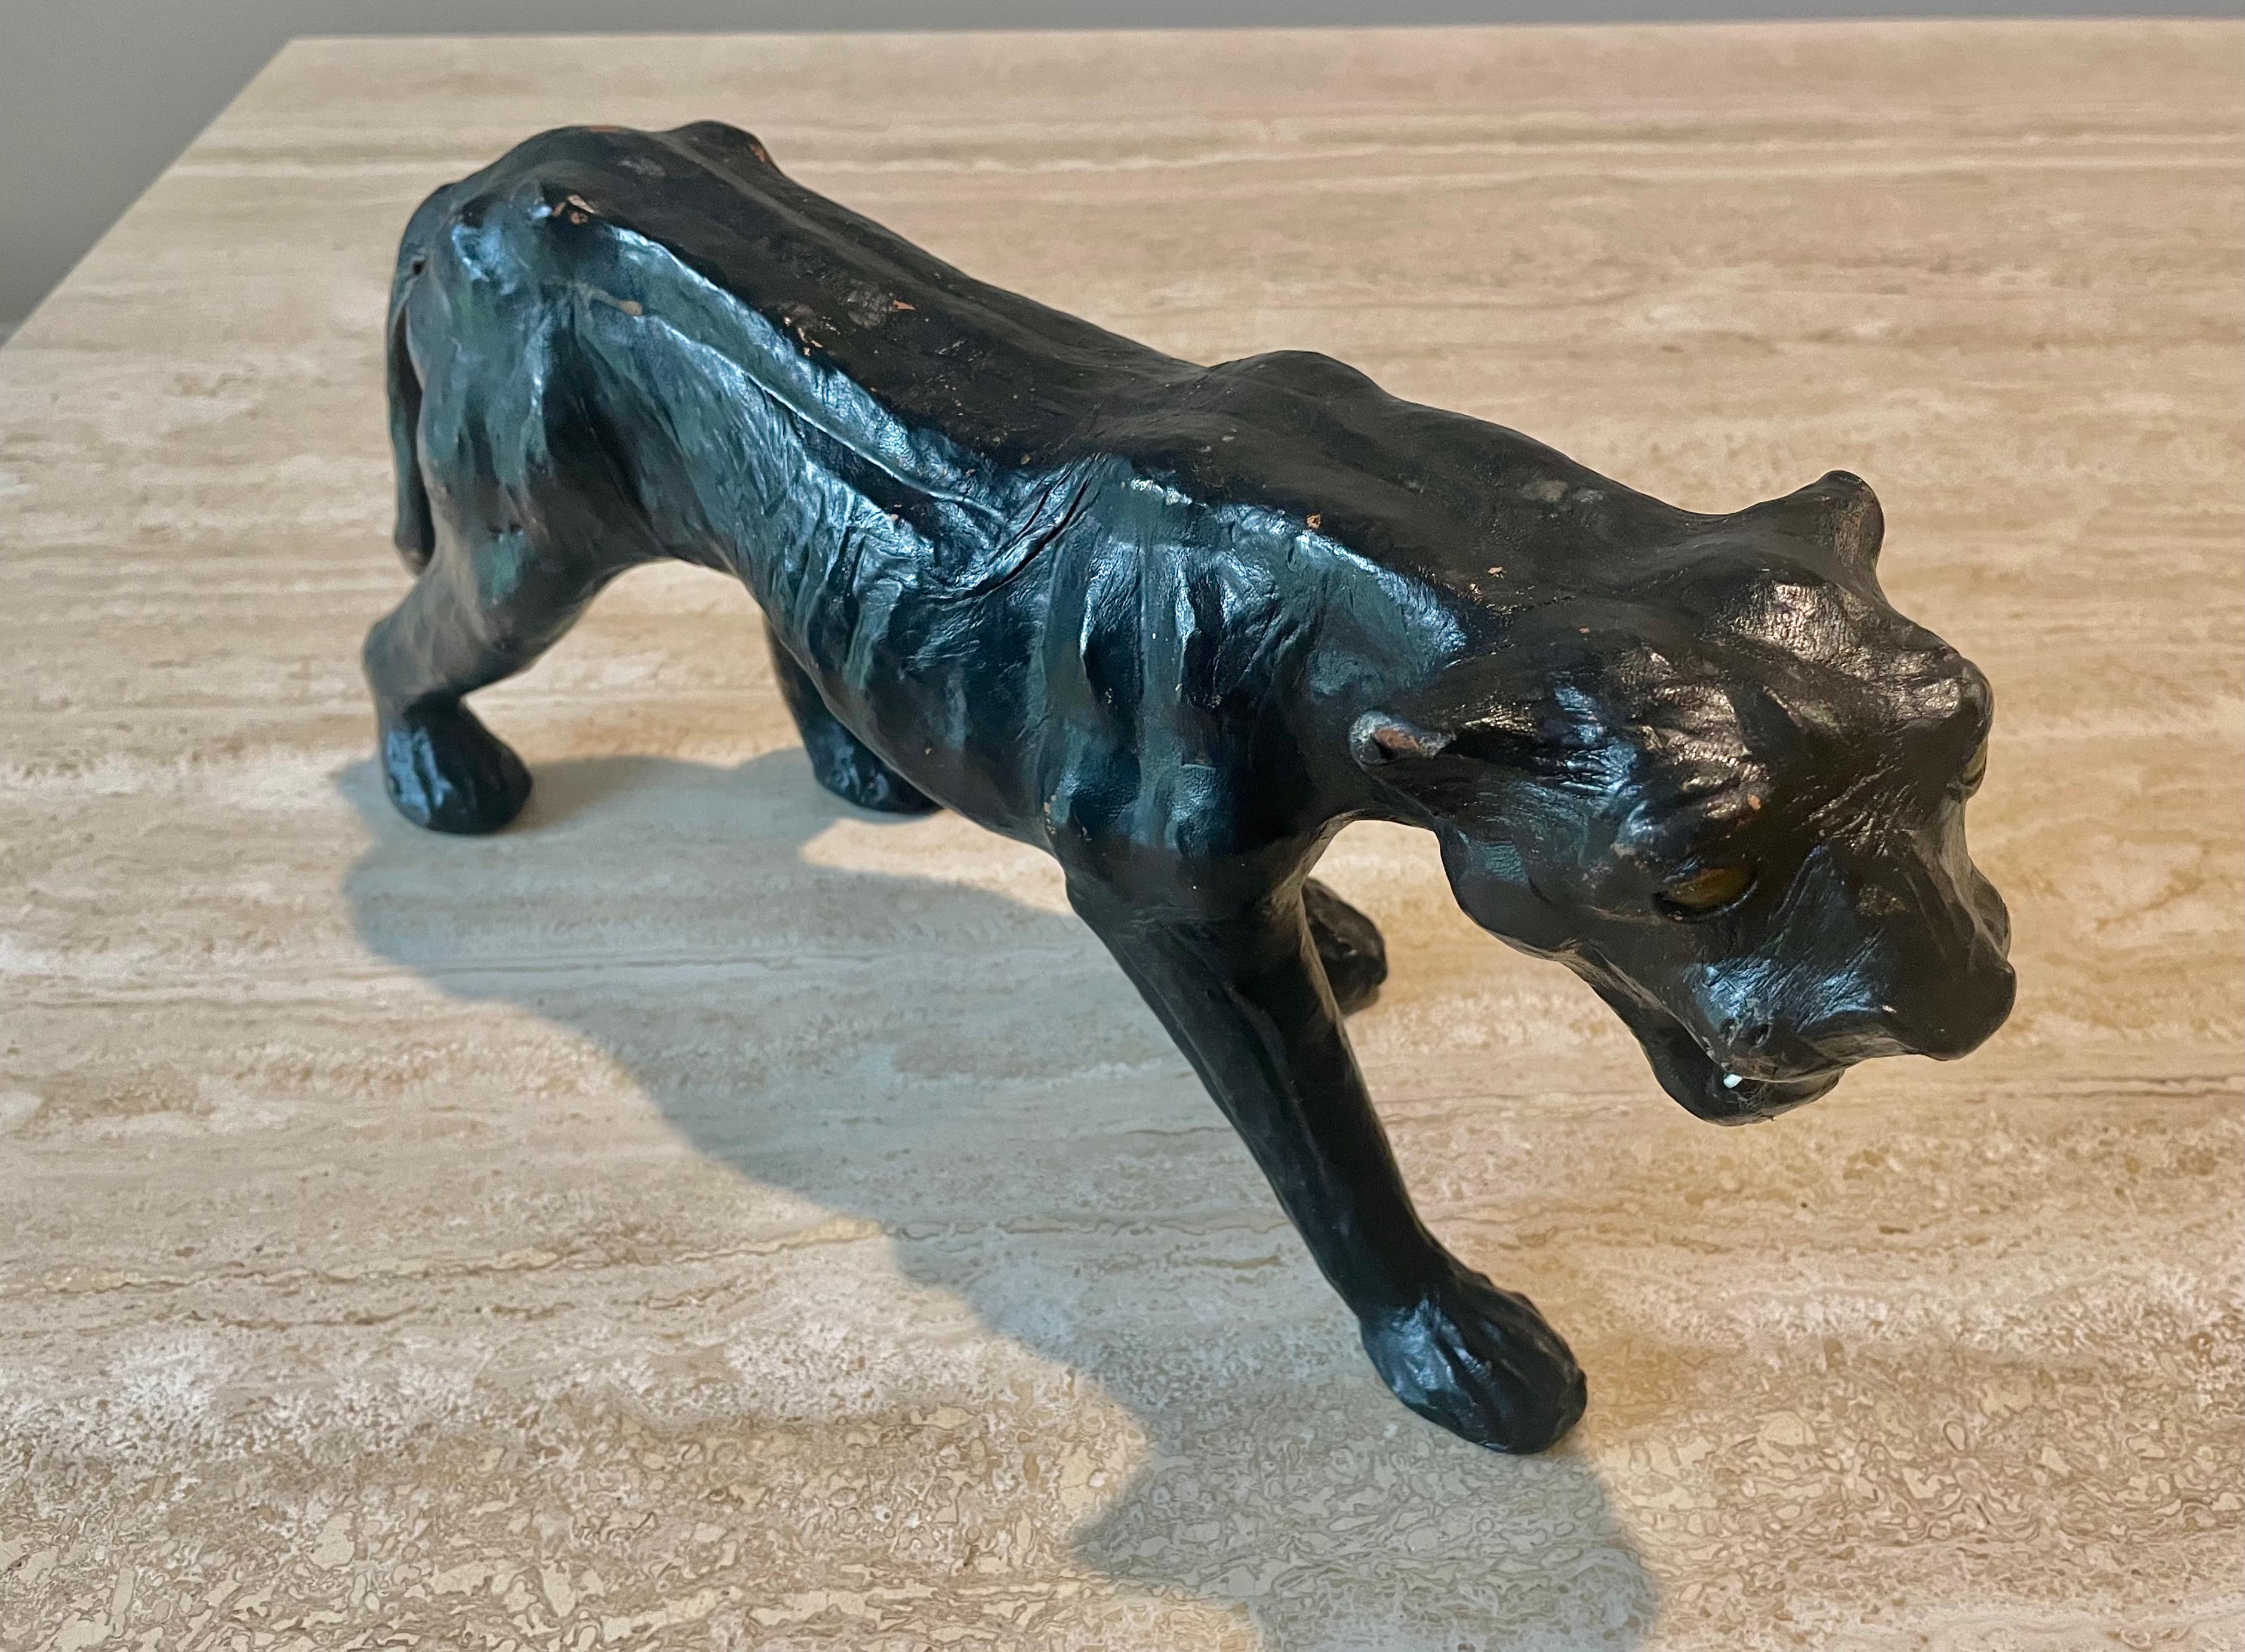 Leather black panther sculpture with a nice patina. Great decorative piece for a shelf or living room.